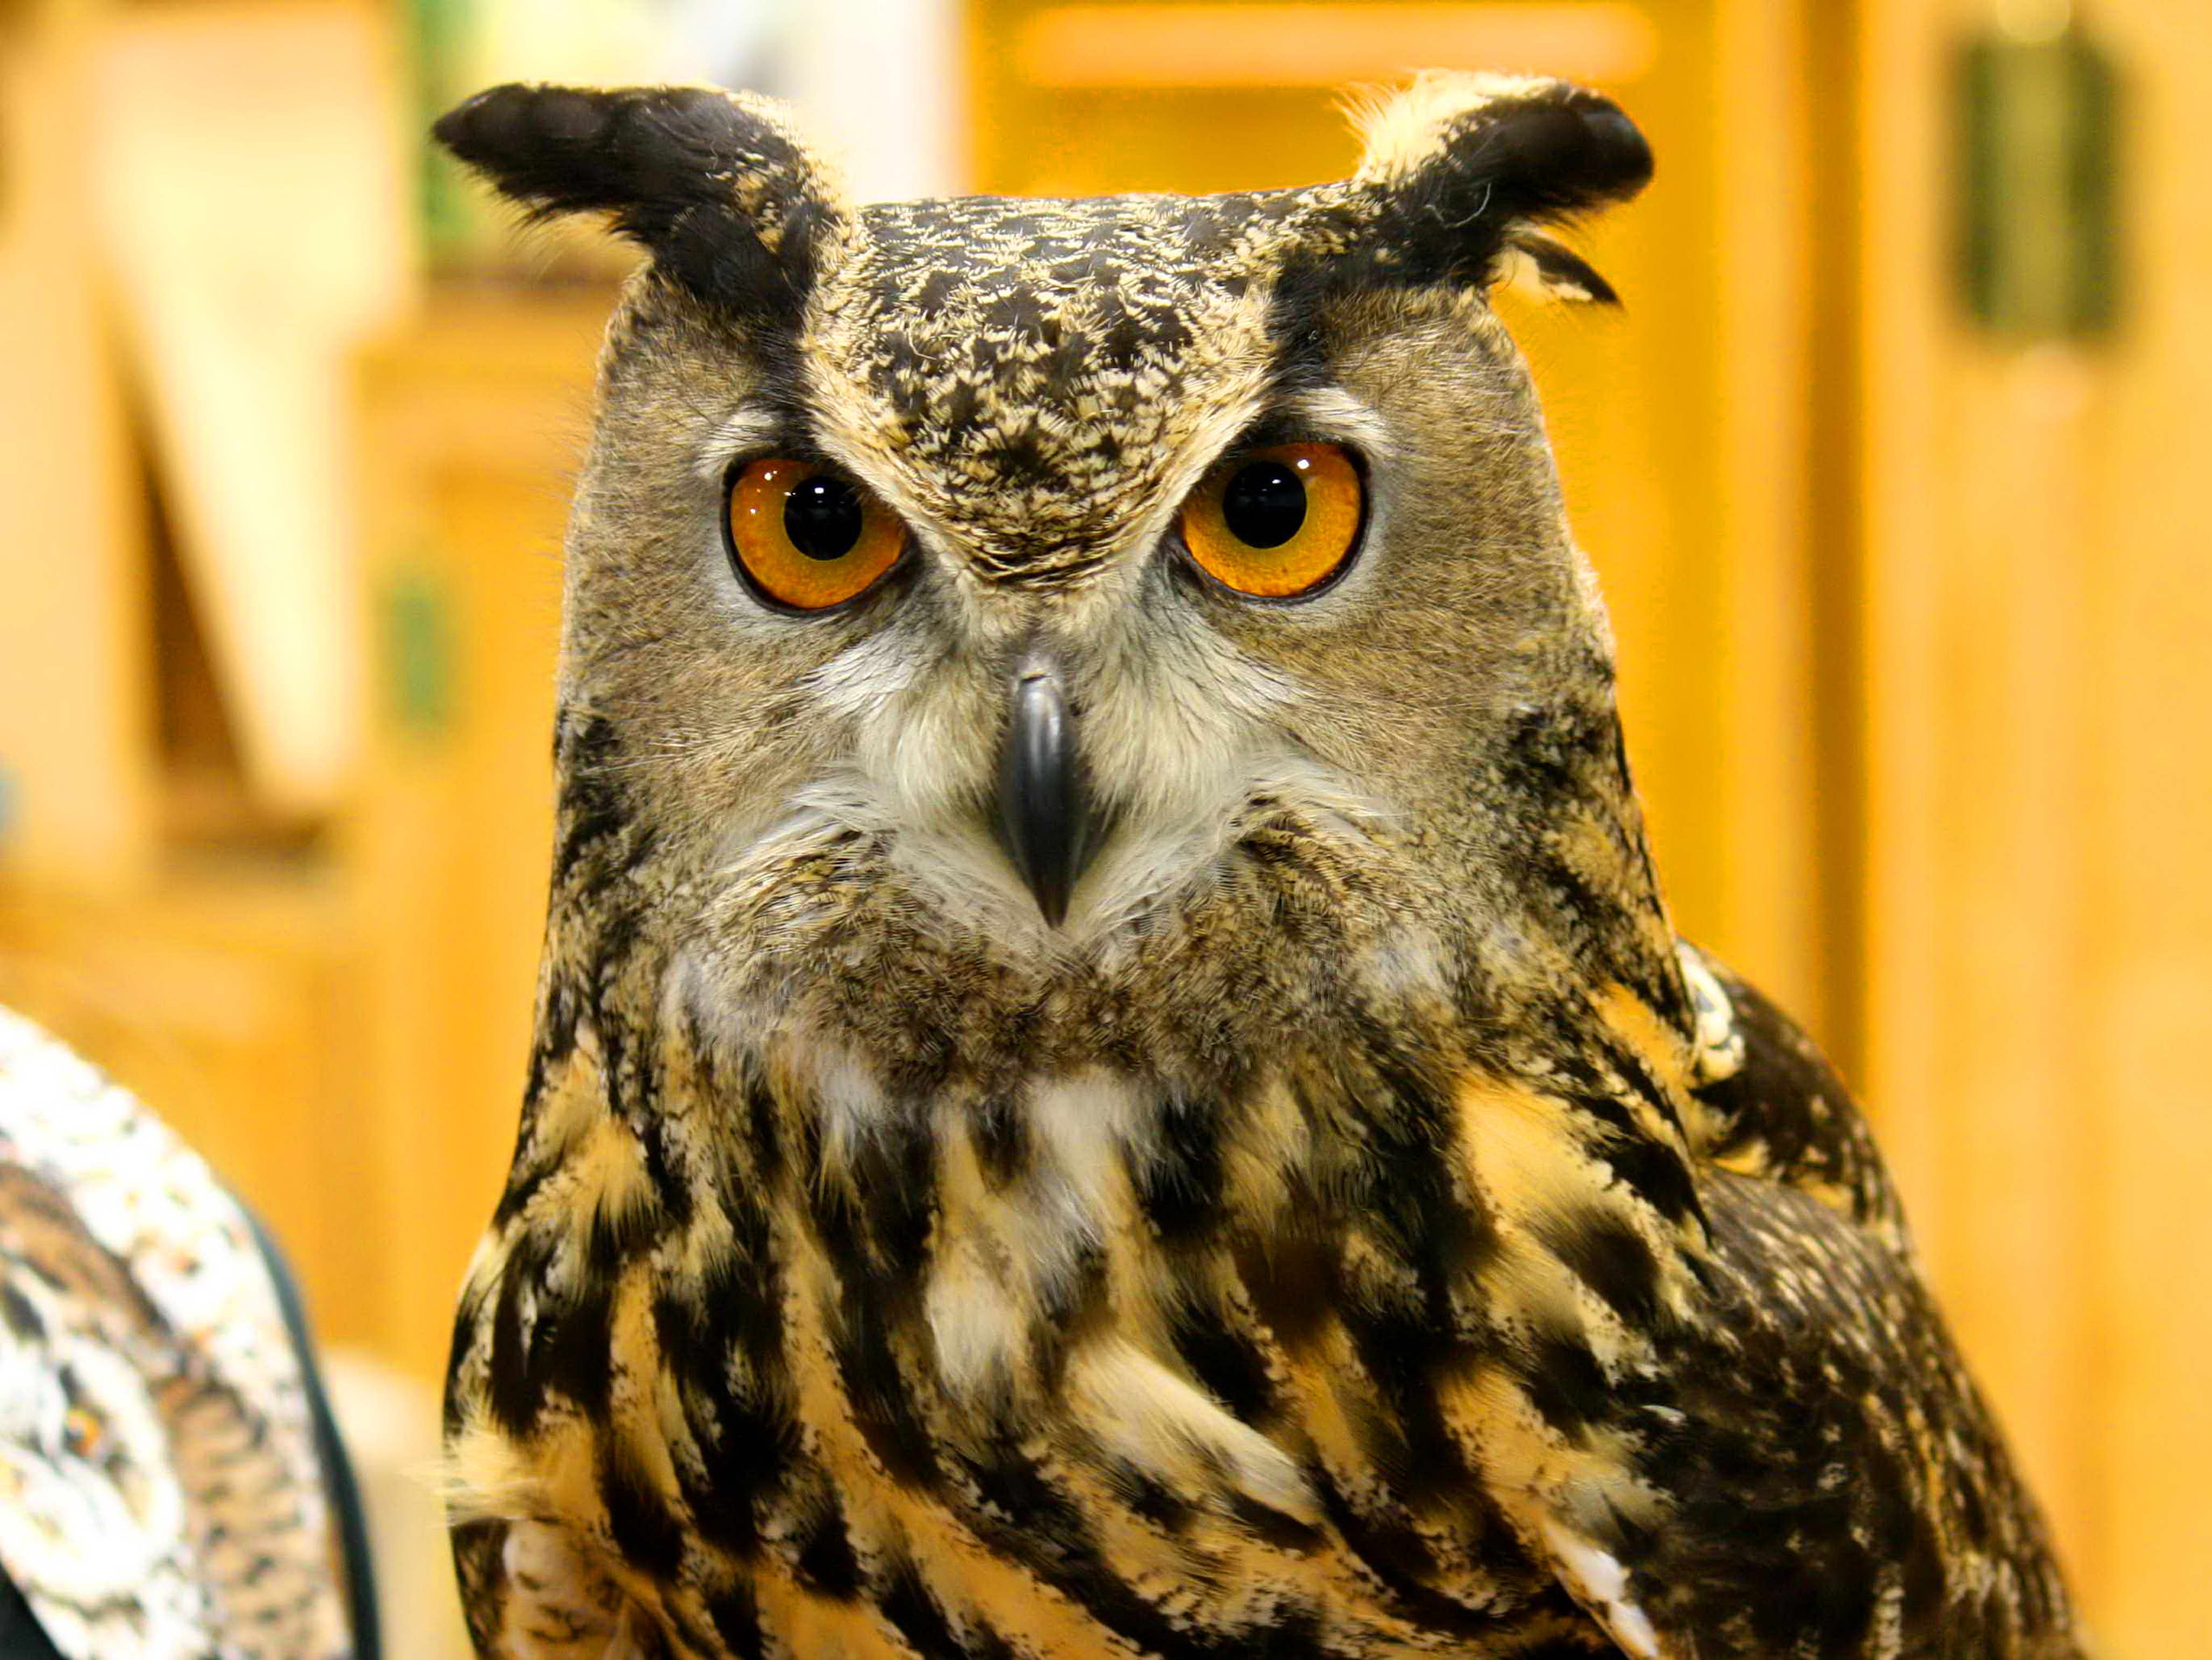 Great horned owl photo